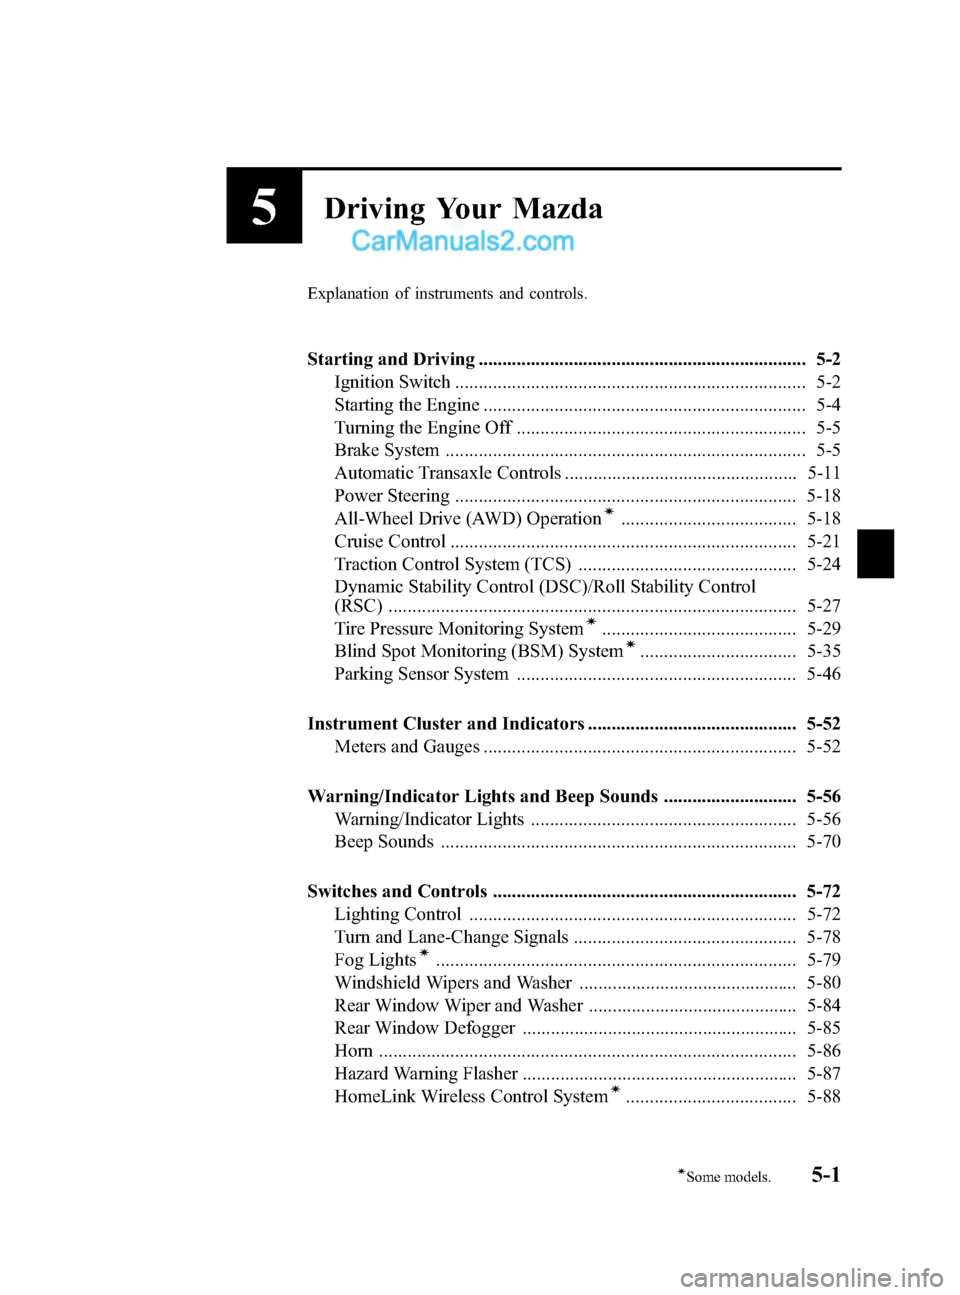 MAZDA MODEL CX-9 2015  Owners Manual (in English) Black plate (179,1)
5Driving Your Mazda
Explanation of instruments and controls.
Starting and Driving ..................................................................... 5-2Ignition Switch .........